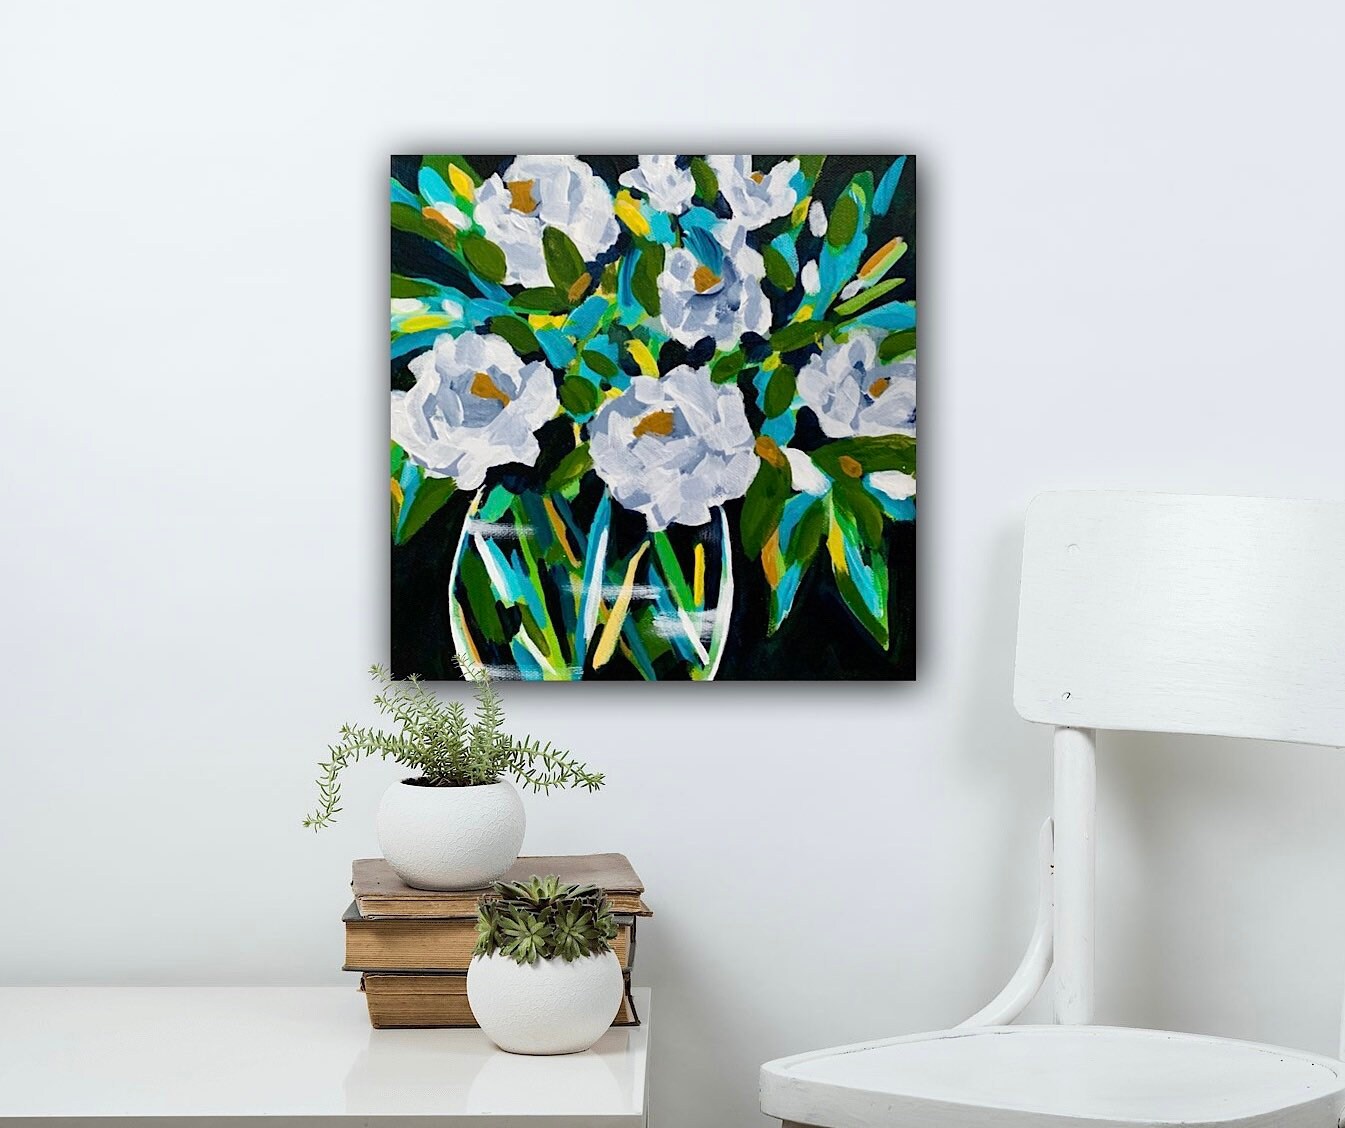 White flowers in vase classical painting Garden decor Eye catching color botanical design Nature home accent Feminine decor